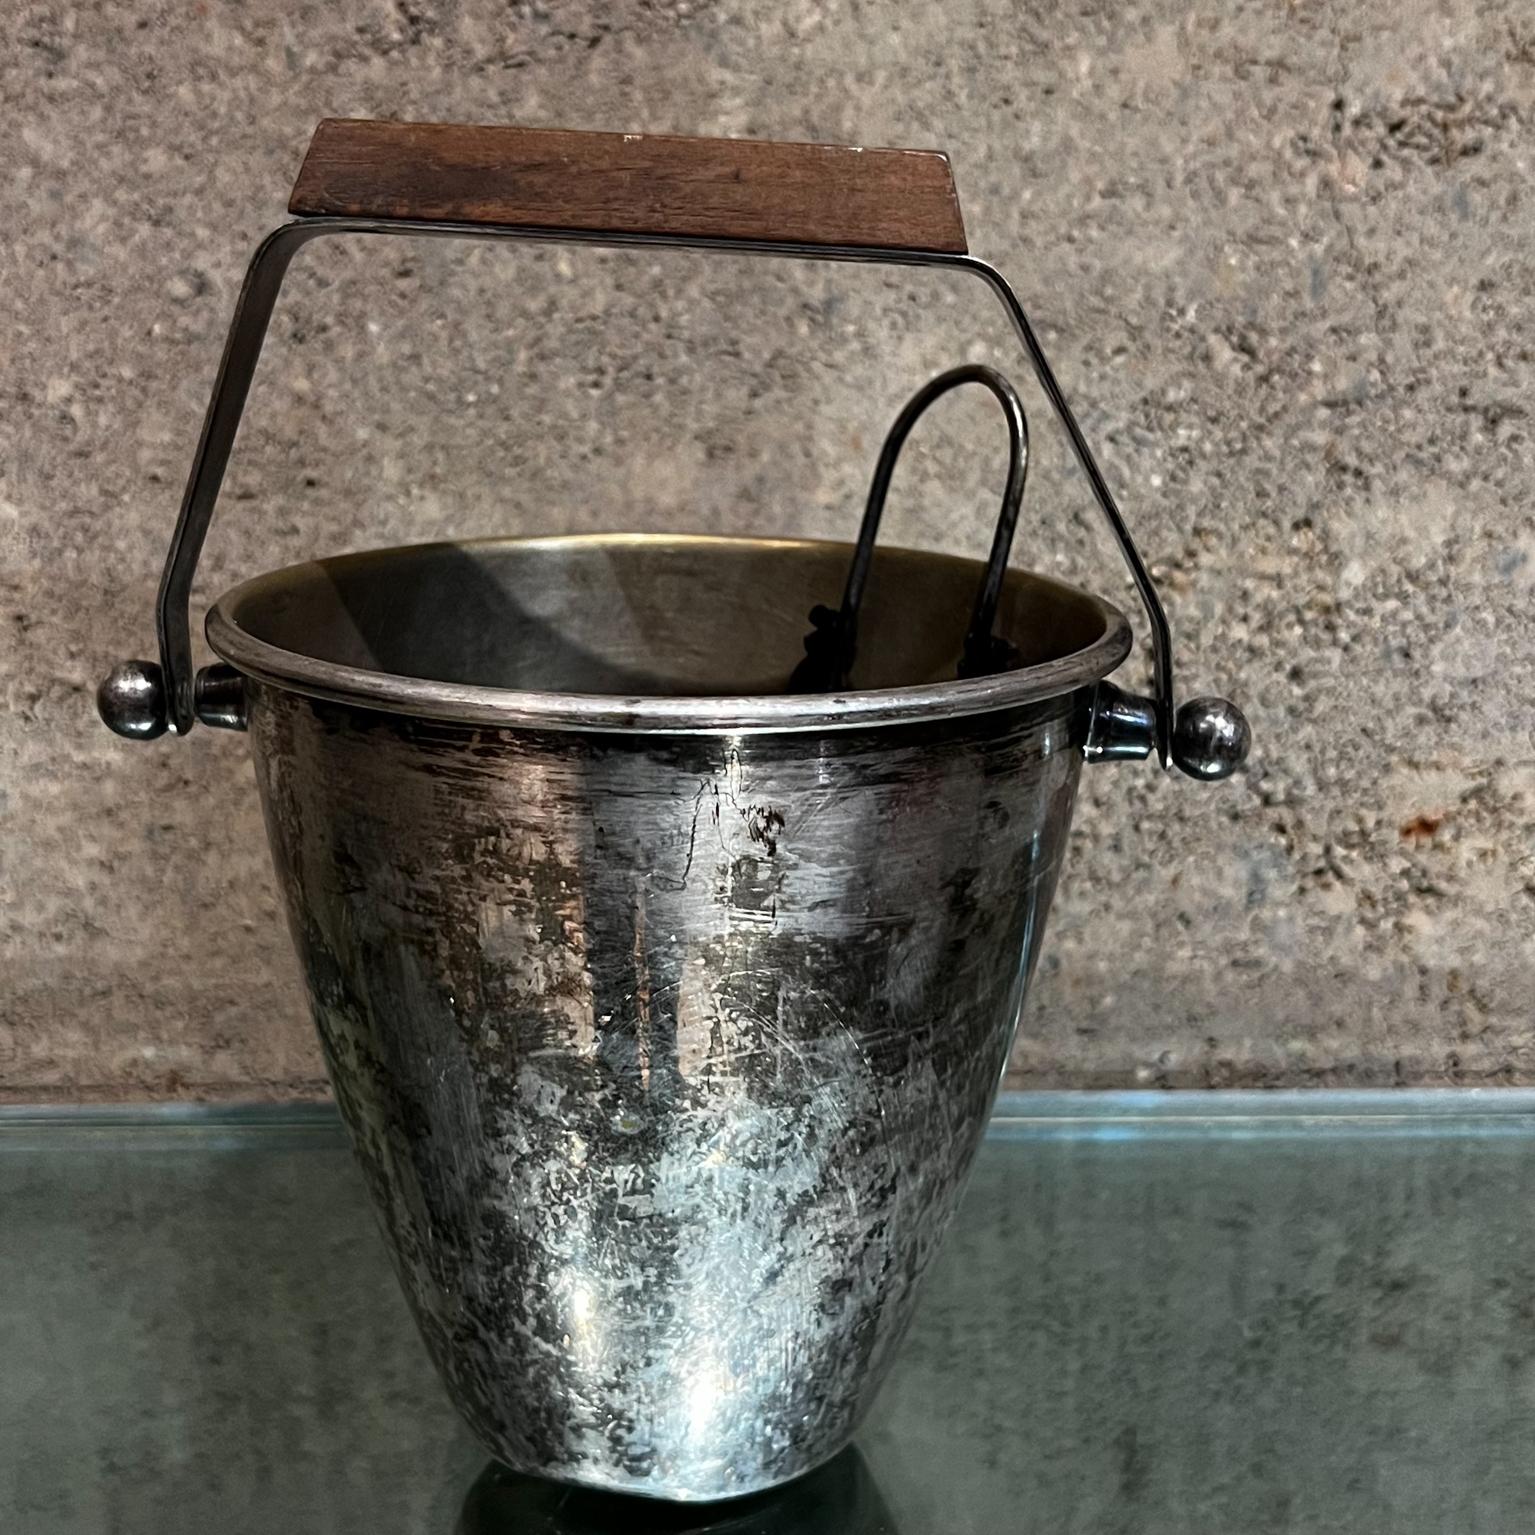 1950s Modernist silver plate ice bucket set with sculptural tongs
Vintage ice bucket, silver plated with original vintage patina.
Wood block (possibly mahogany) to add contrast to the modernist clean lines.
Includes vintage ice tongs, Tongs